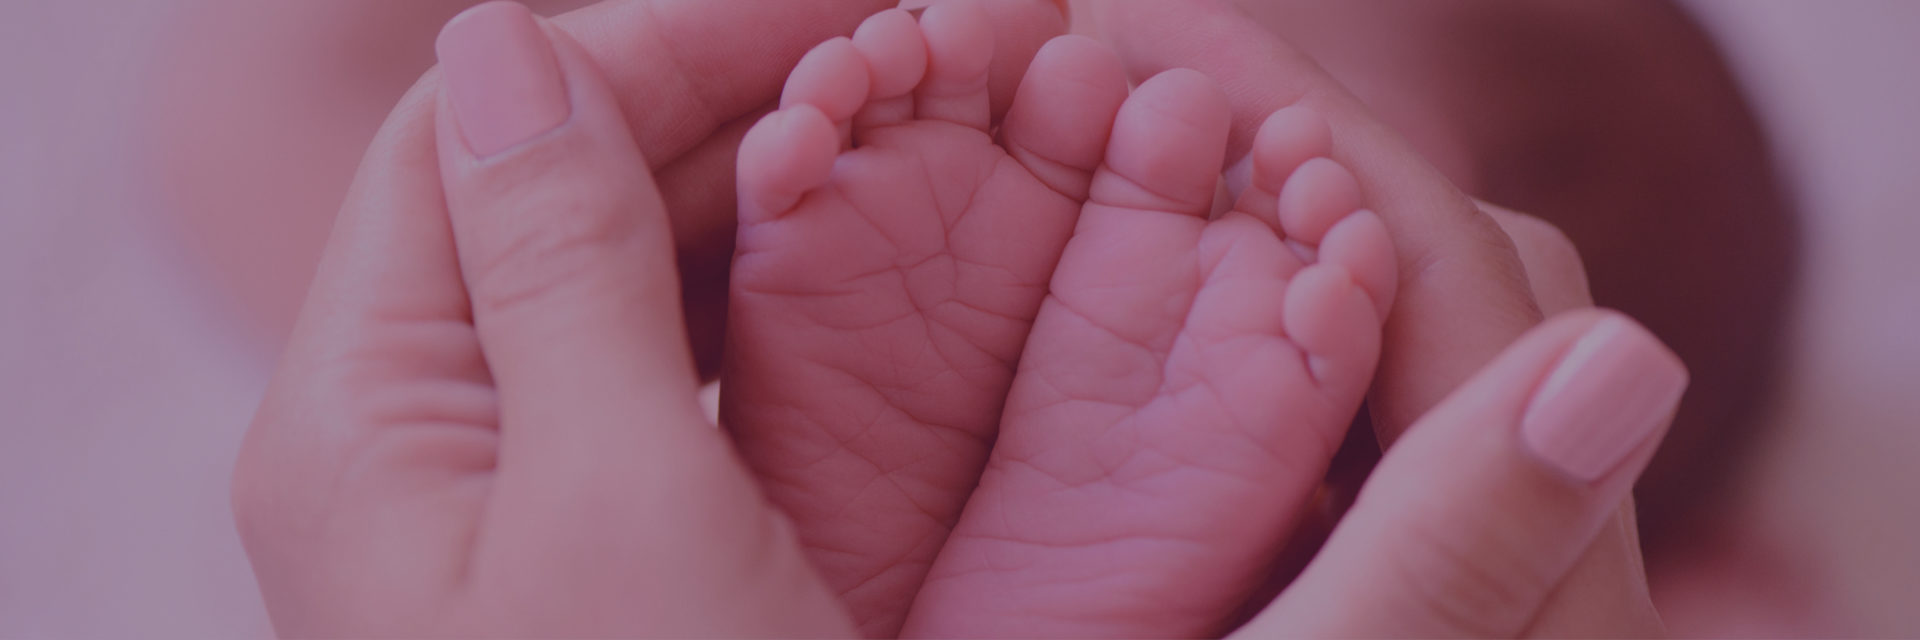 Photo of a newborn baby's feet cradled in a mothers hands.